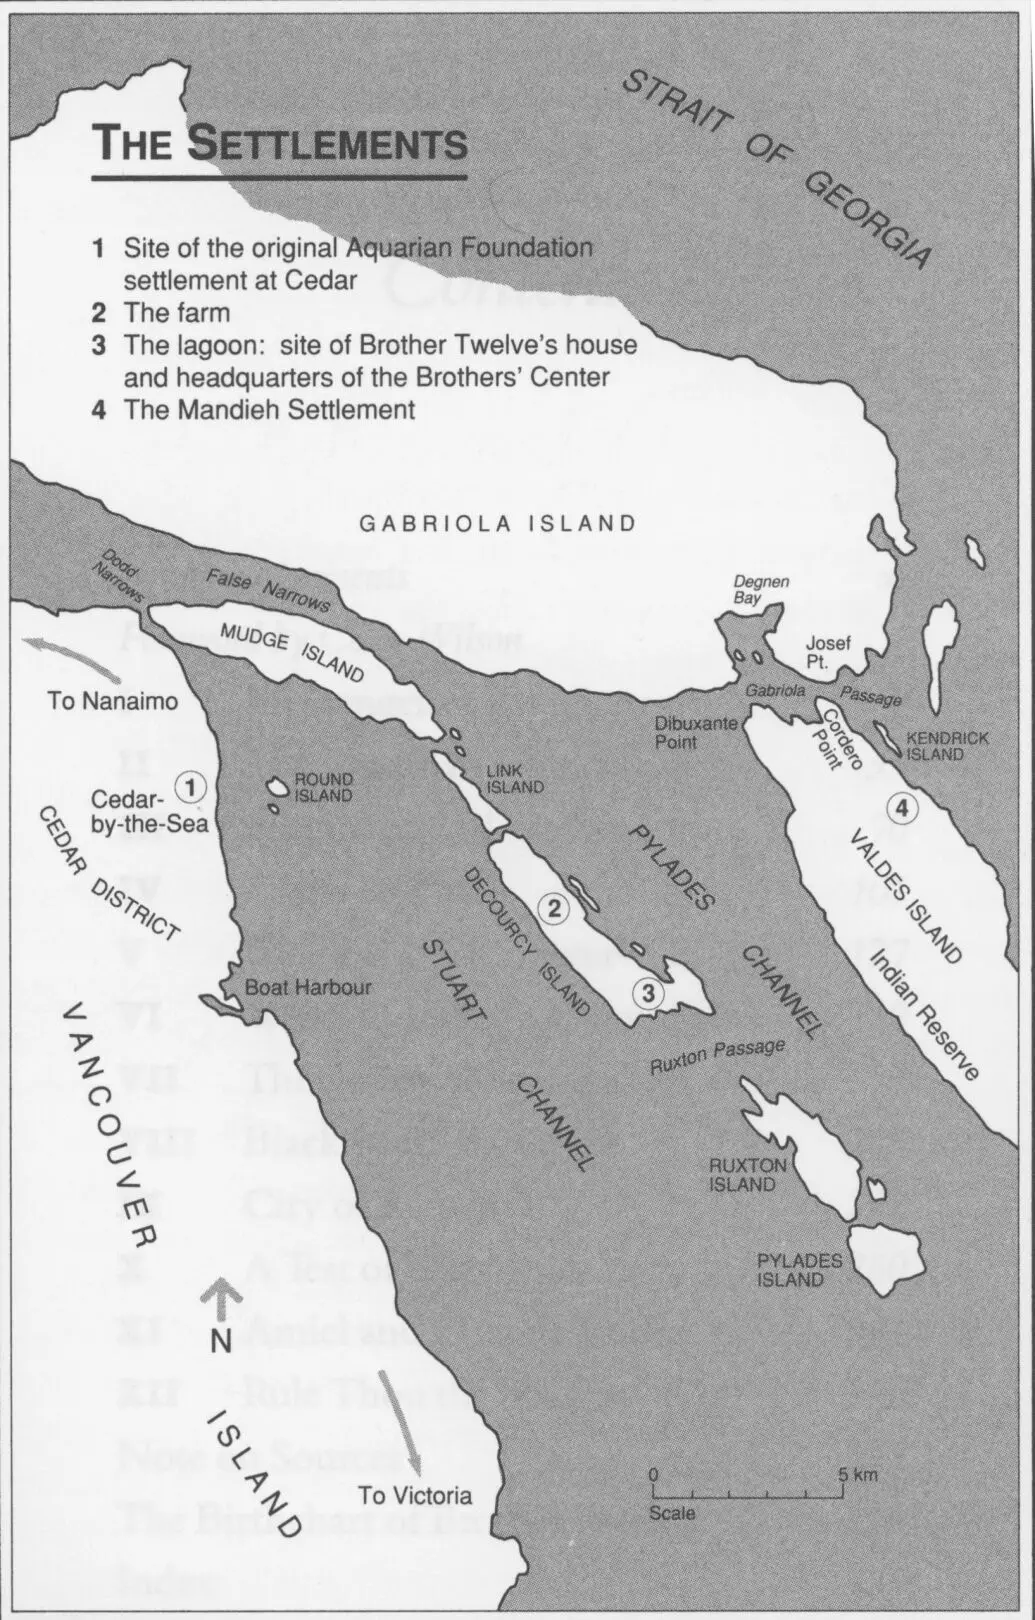 Map of British Columbia Islands - Mary Connally and the Cult -Campus Obscura News